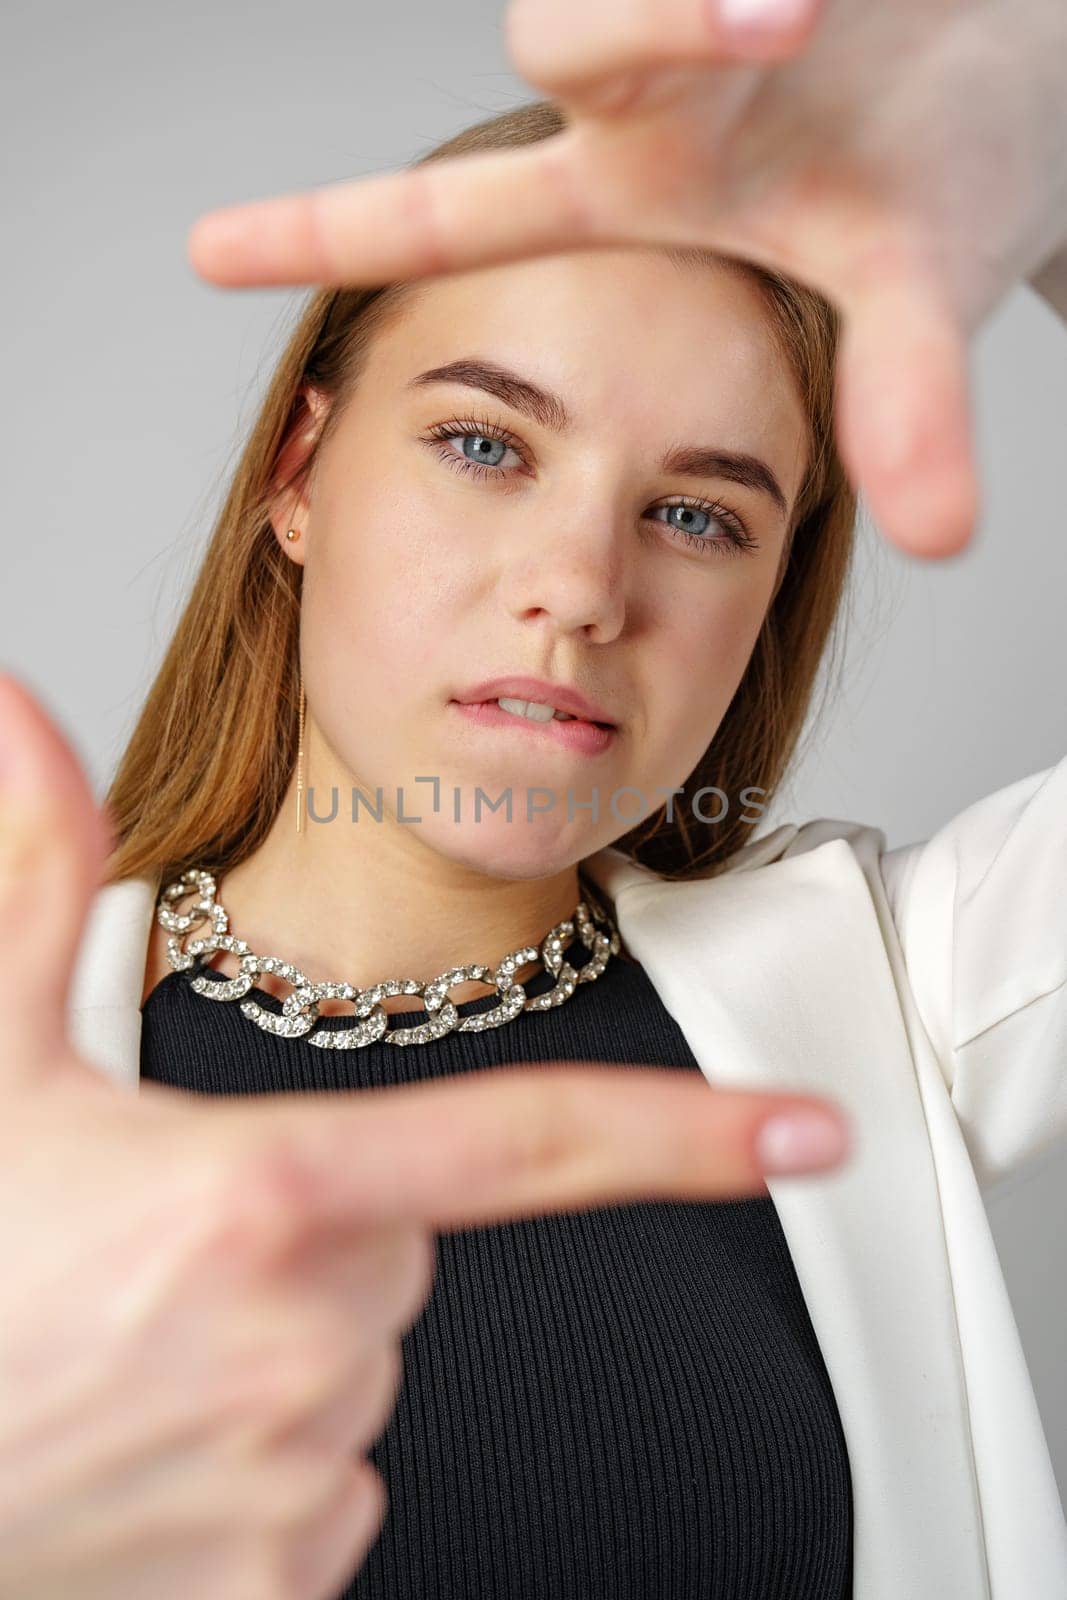 Young Woman Making Frame Gesture With Hands Against a Neutral Background by Fabrikasimf